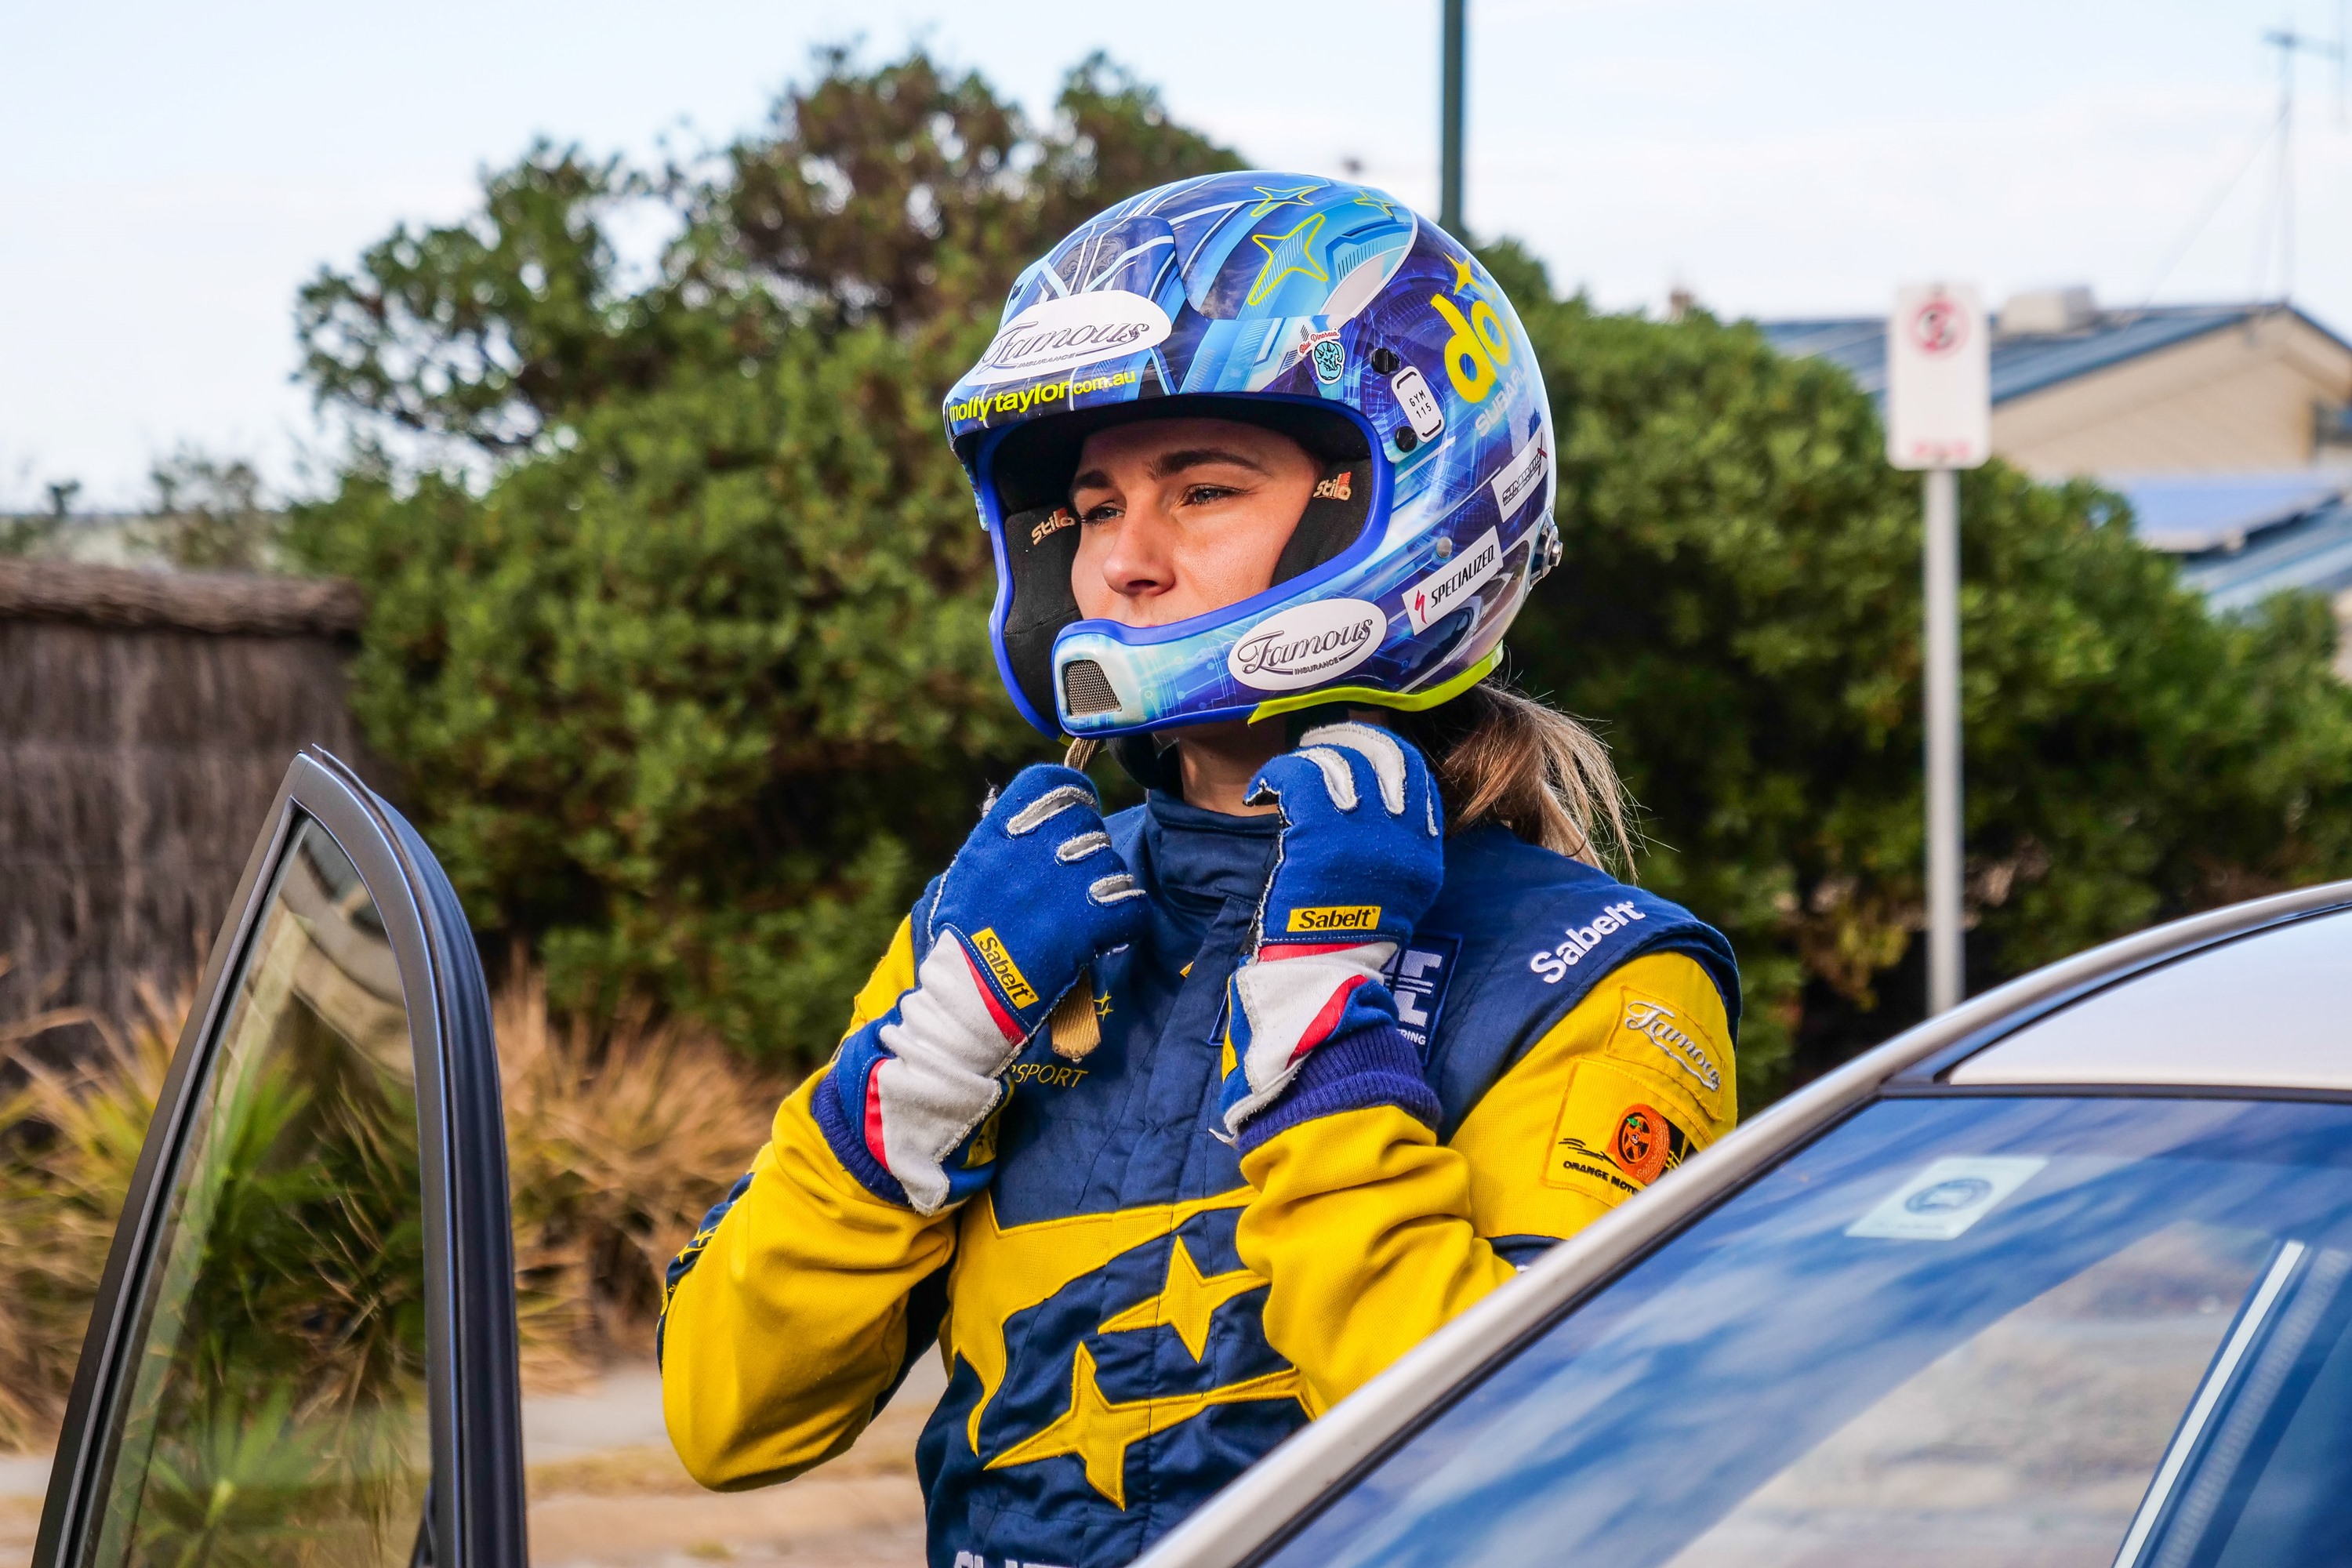 Molly Taylor, looking forward to 2019 with a  revised livery, a new motorsport provider and an all-new All-Wheel Drive WRX STI will give the factory-backed Subaru do Motorsport team added edge in the 2019 CAMS Australian Rally Championship (ARC).